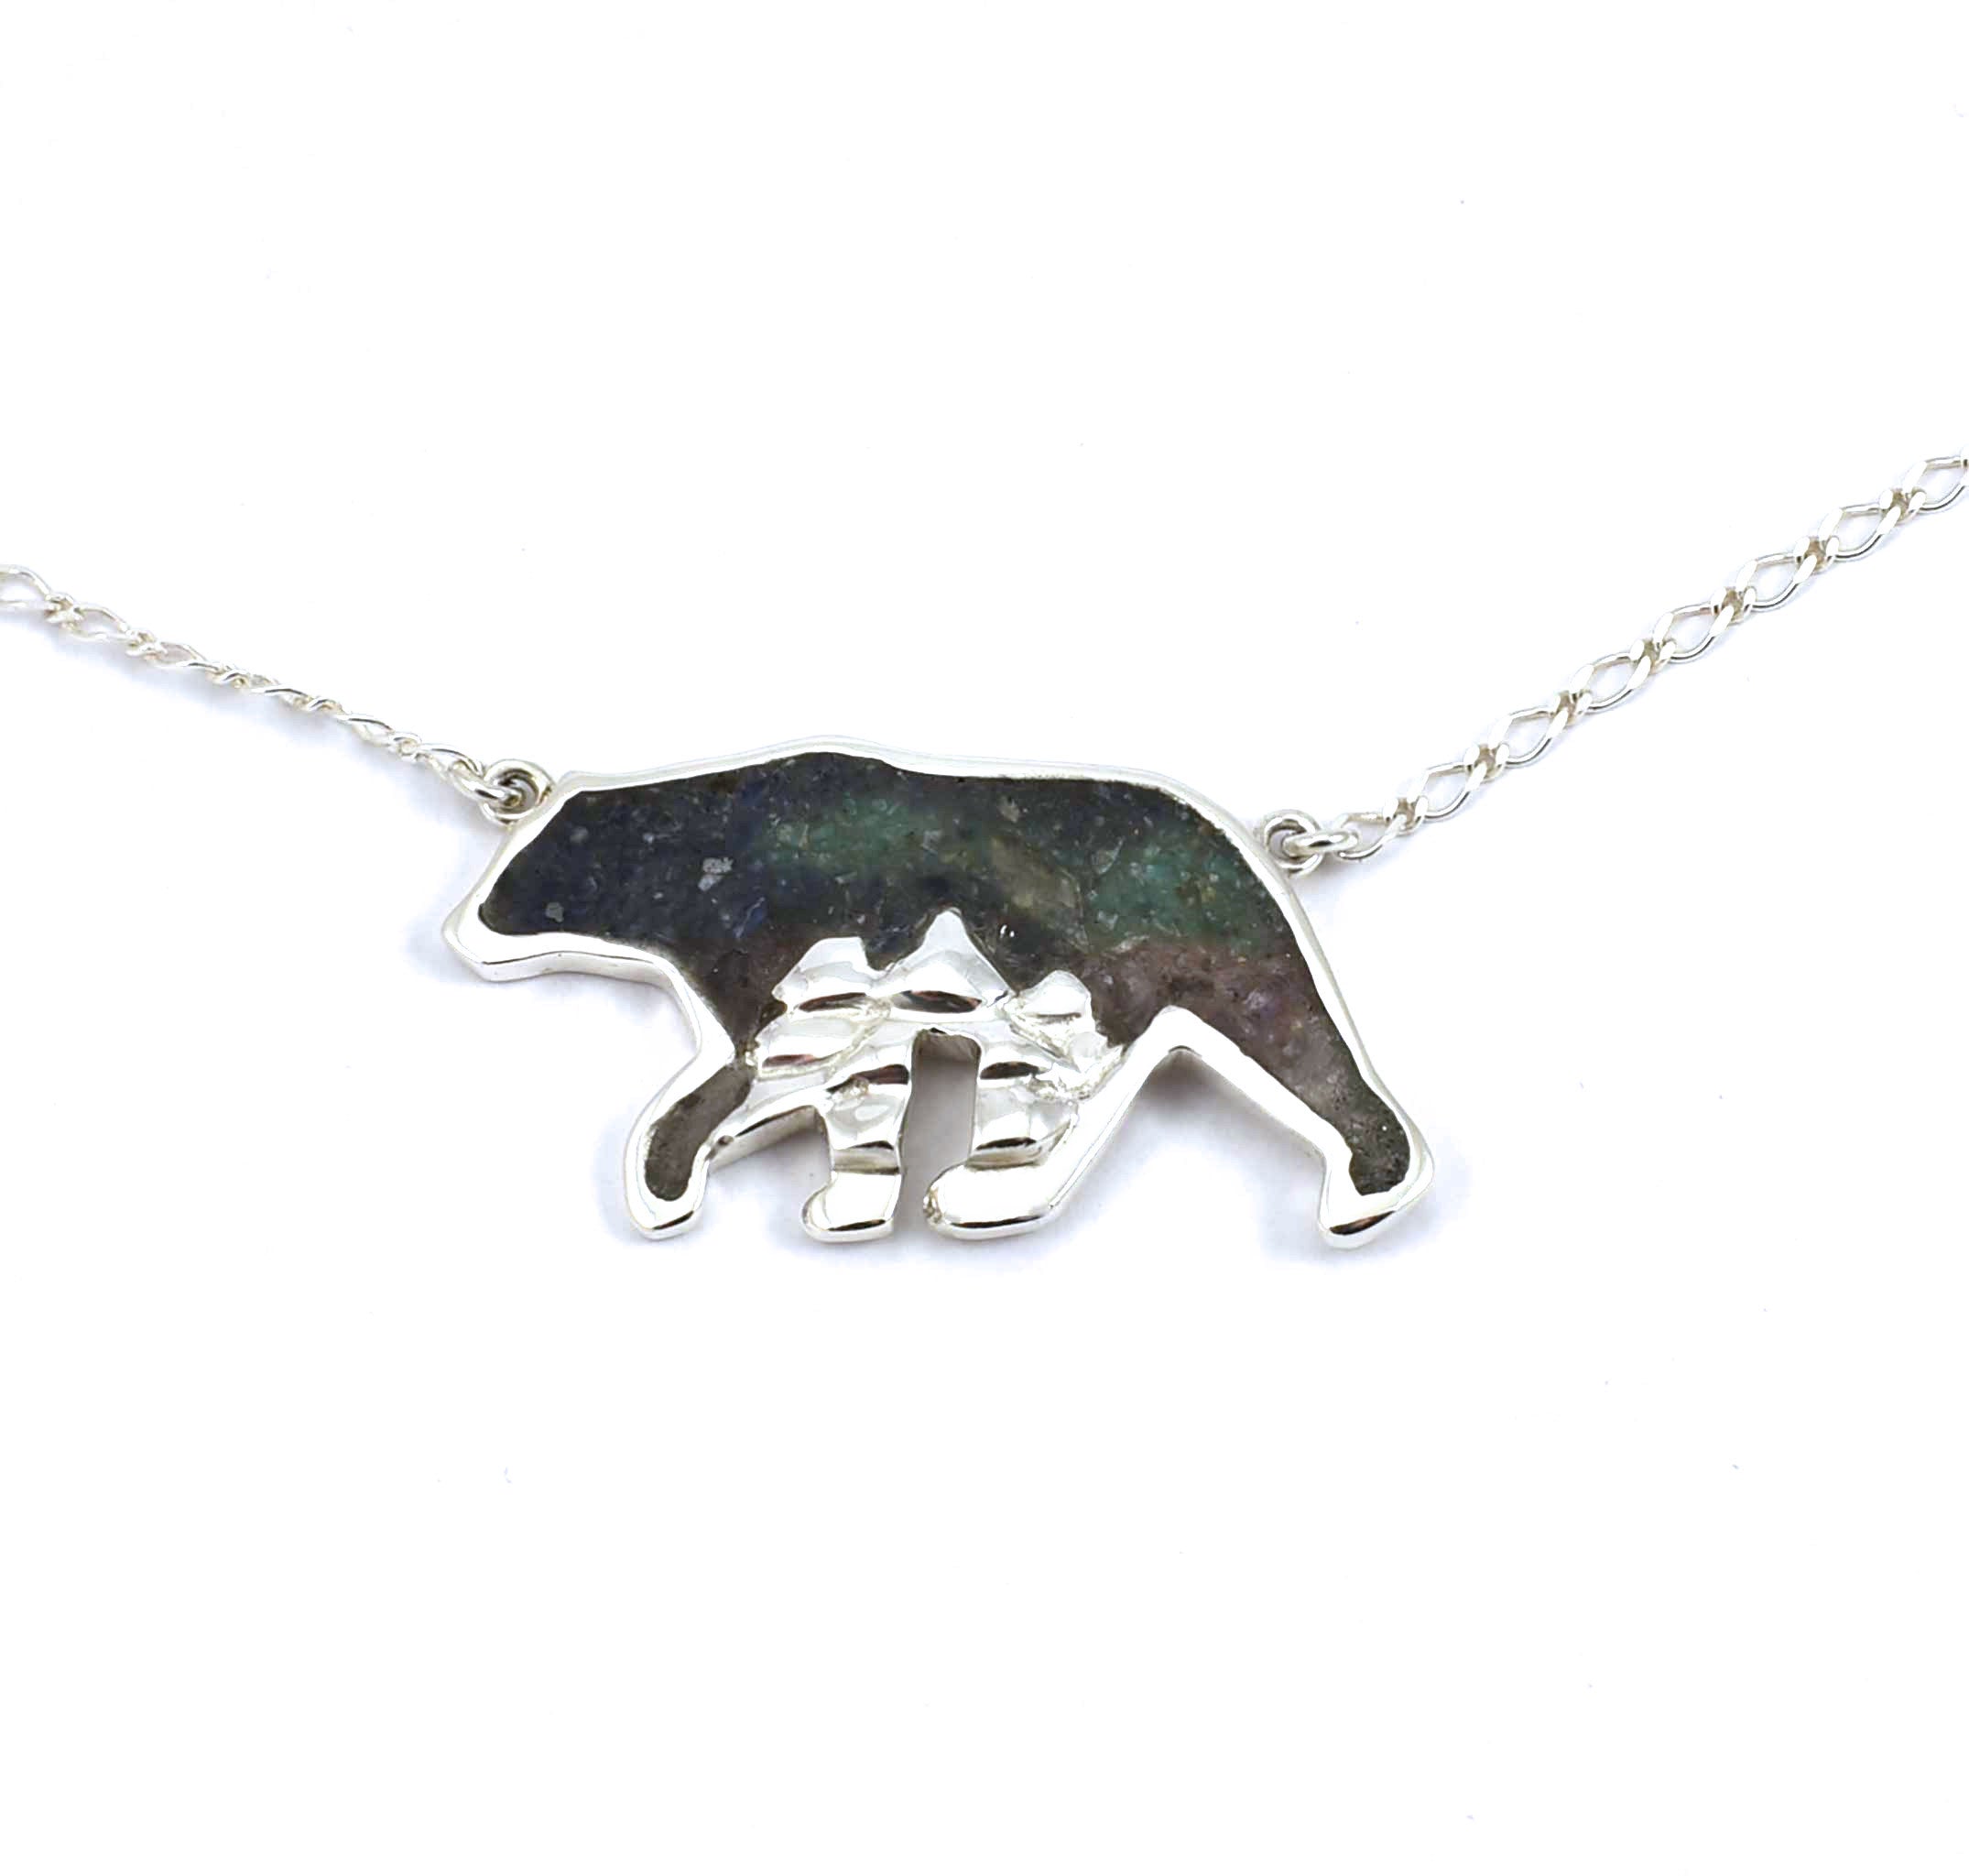 Front view of large sterling silver bear pendant with tree accents and crushed gemstone inlay